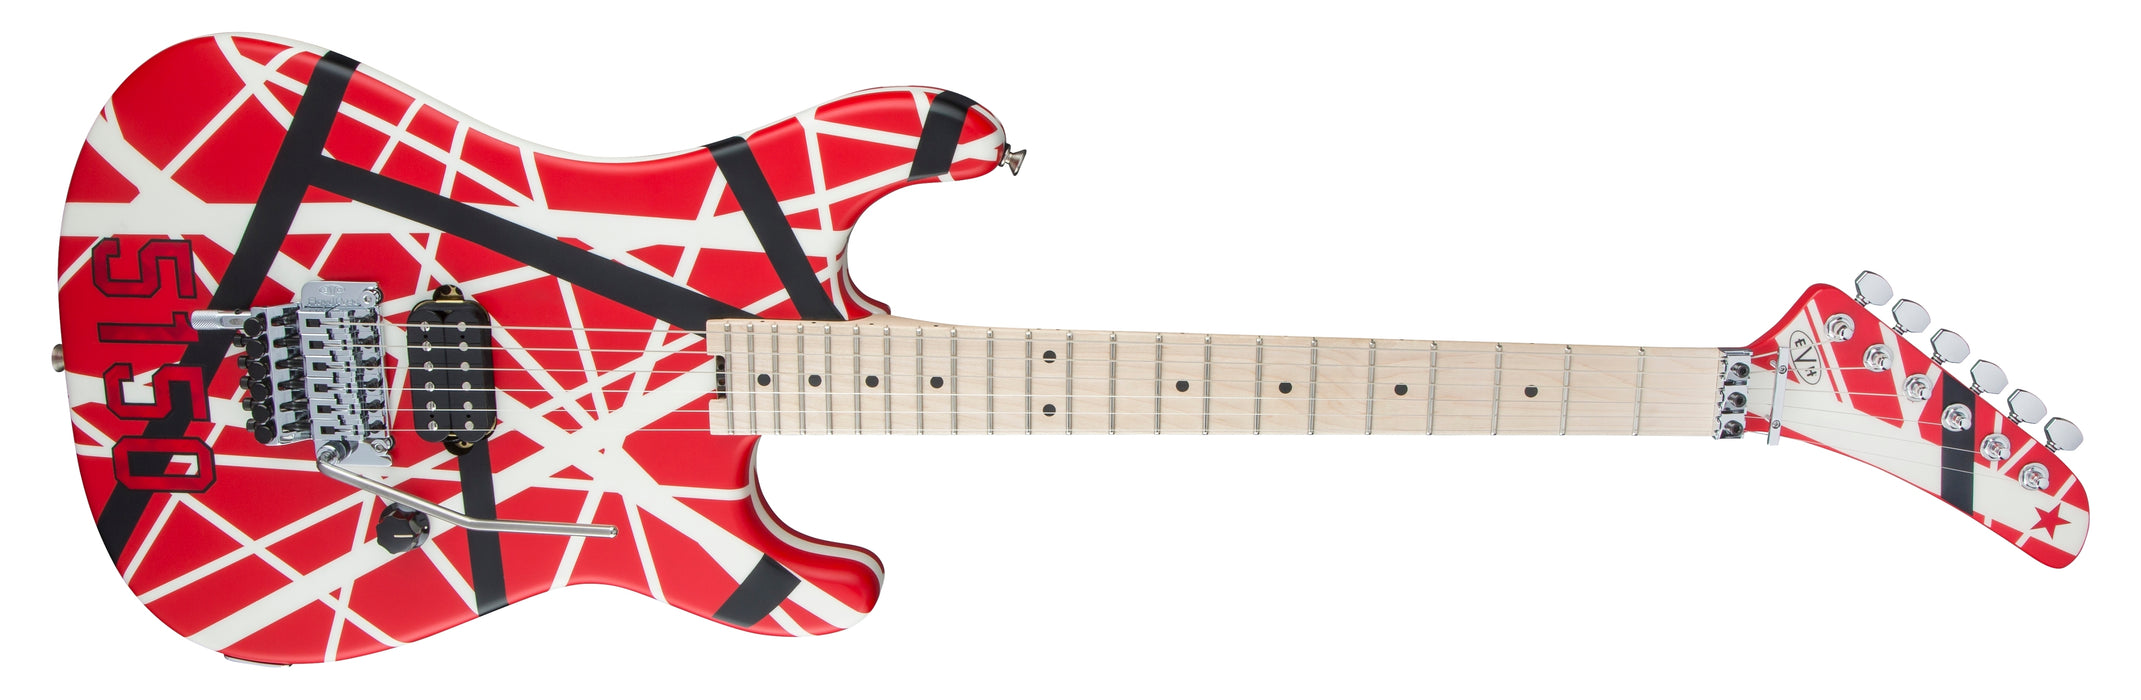 EVH Striped Series 5150™, Maple Fingerboard, Red with Black and White Stripes